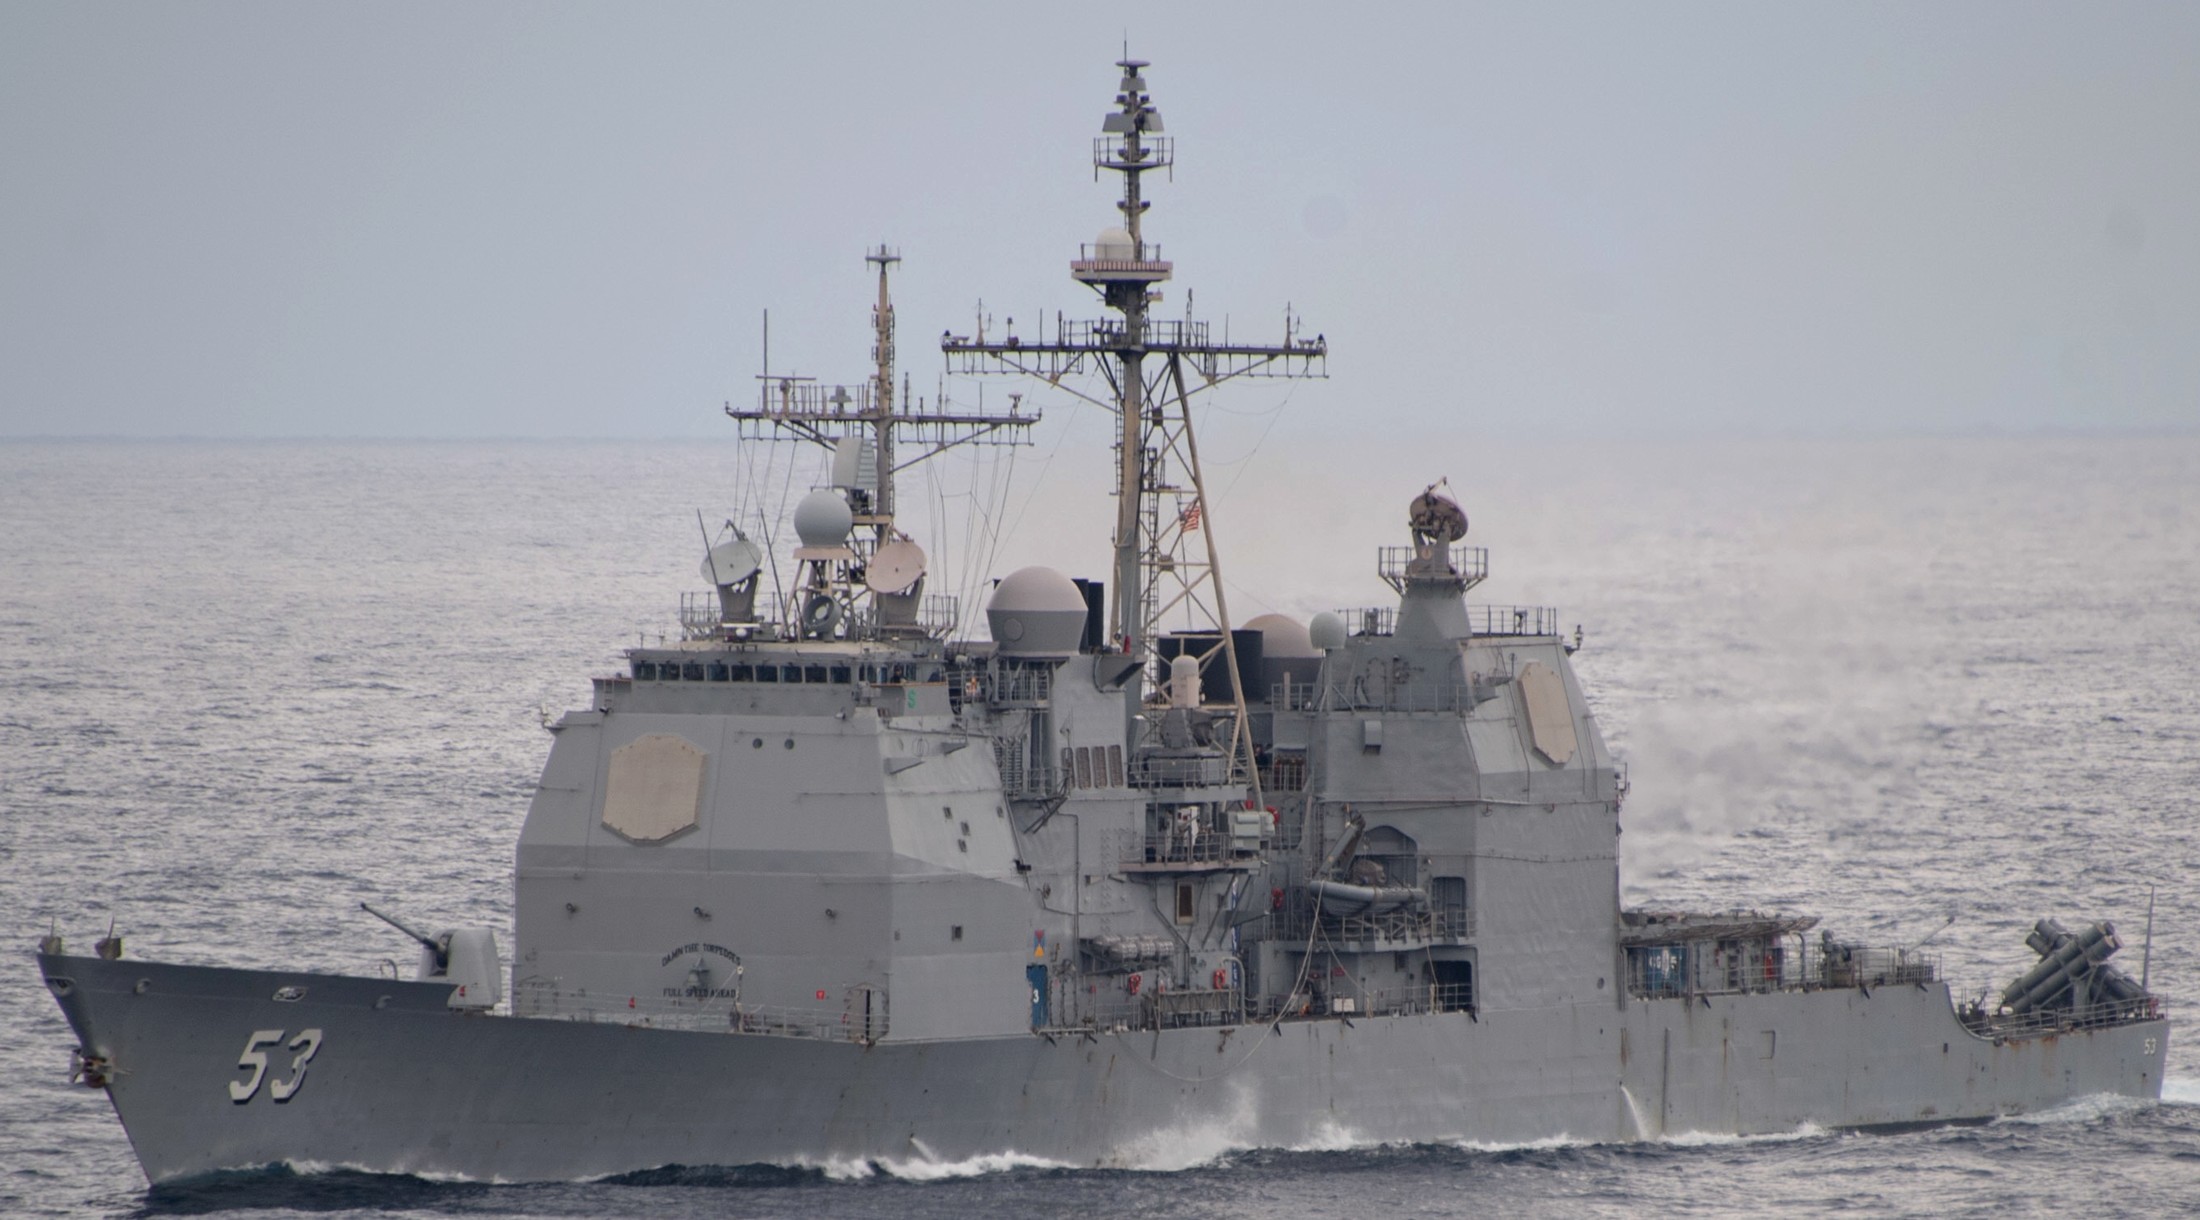 cg-53 uss mobile bay ticonderoga class guided missile cruiser aegis us navy 139